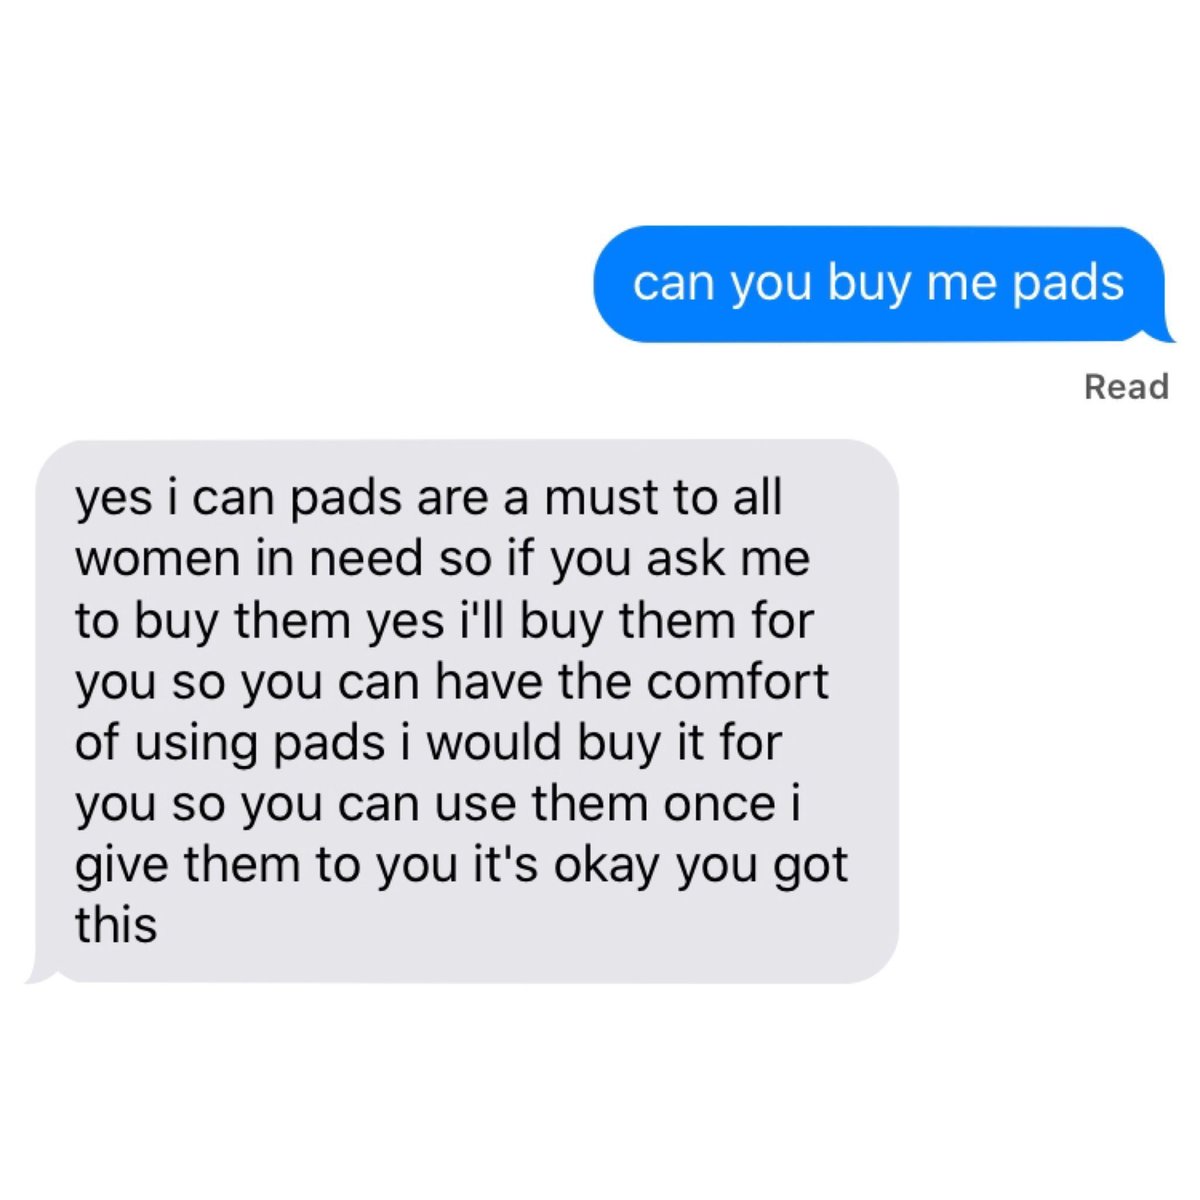 star trek discovery characters as "can you buy me pads:" go